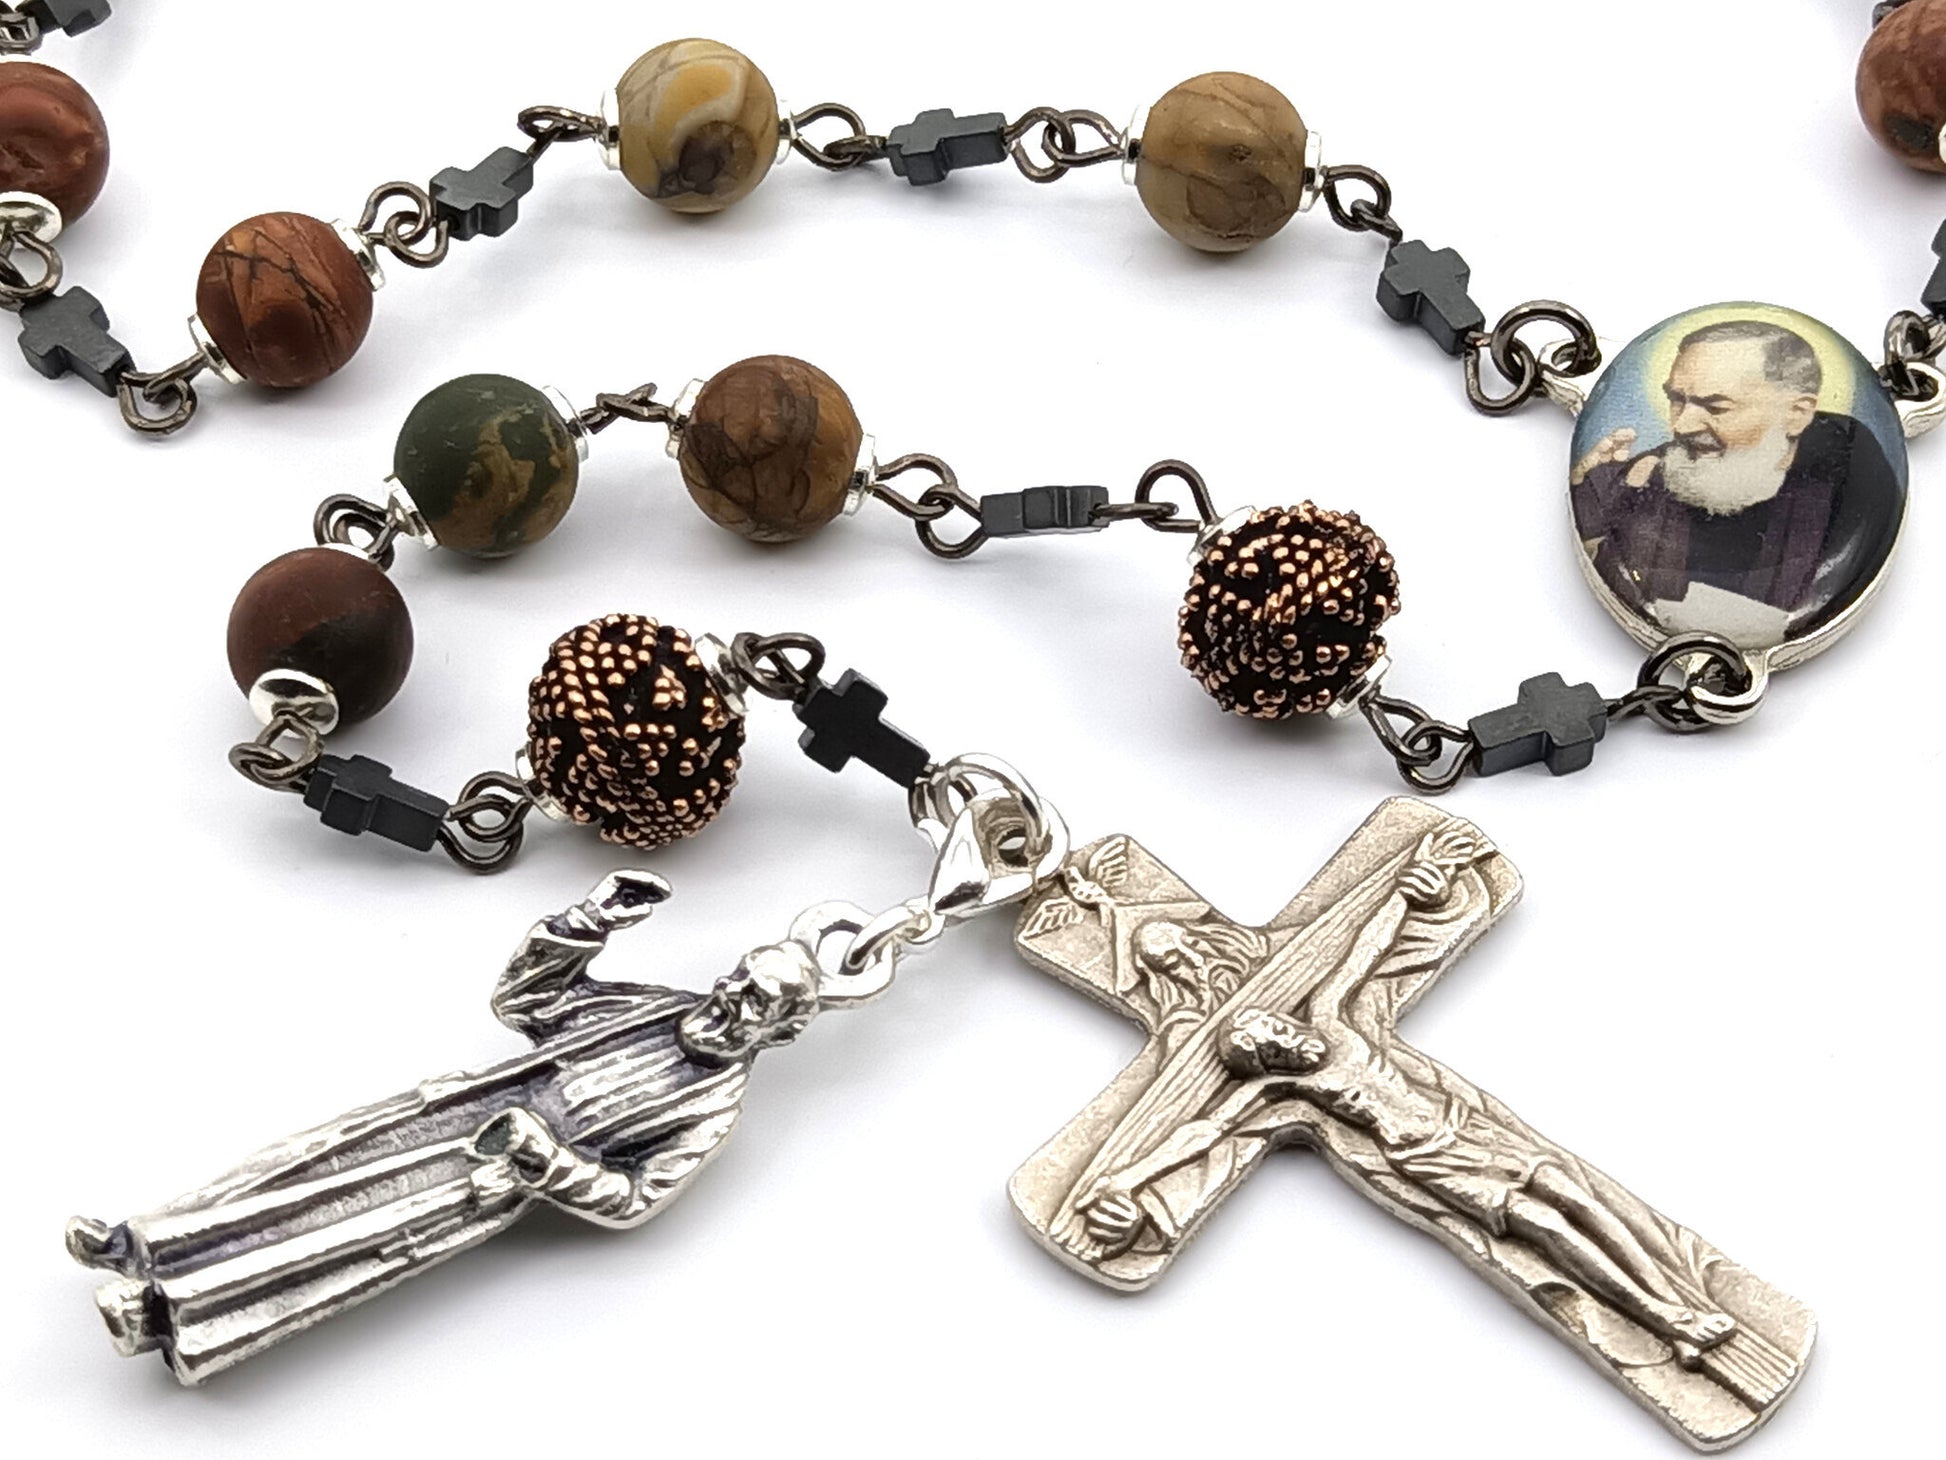 Saint Padre Pio unique rosary beads single decade rosary with gemstone and copper beads, silver Trinity crucifix and Padre Pio medal.